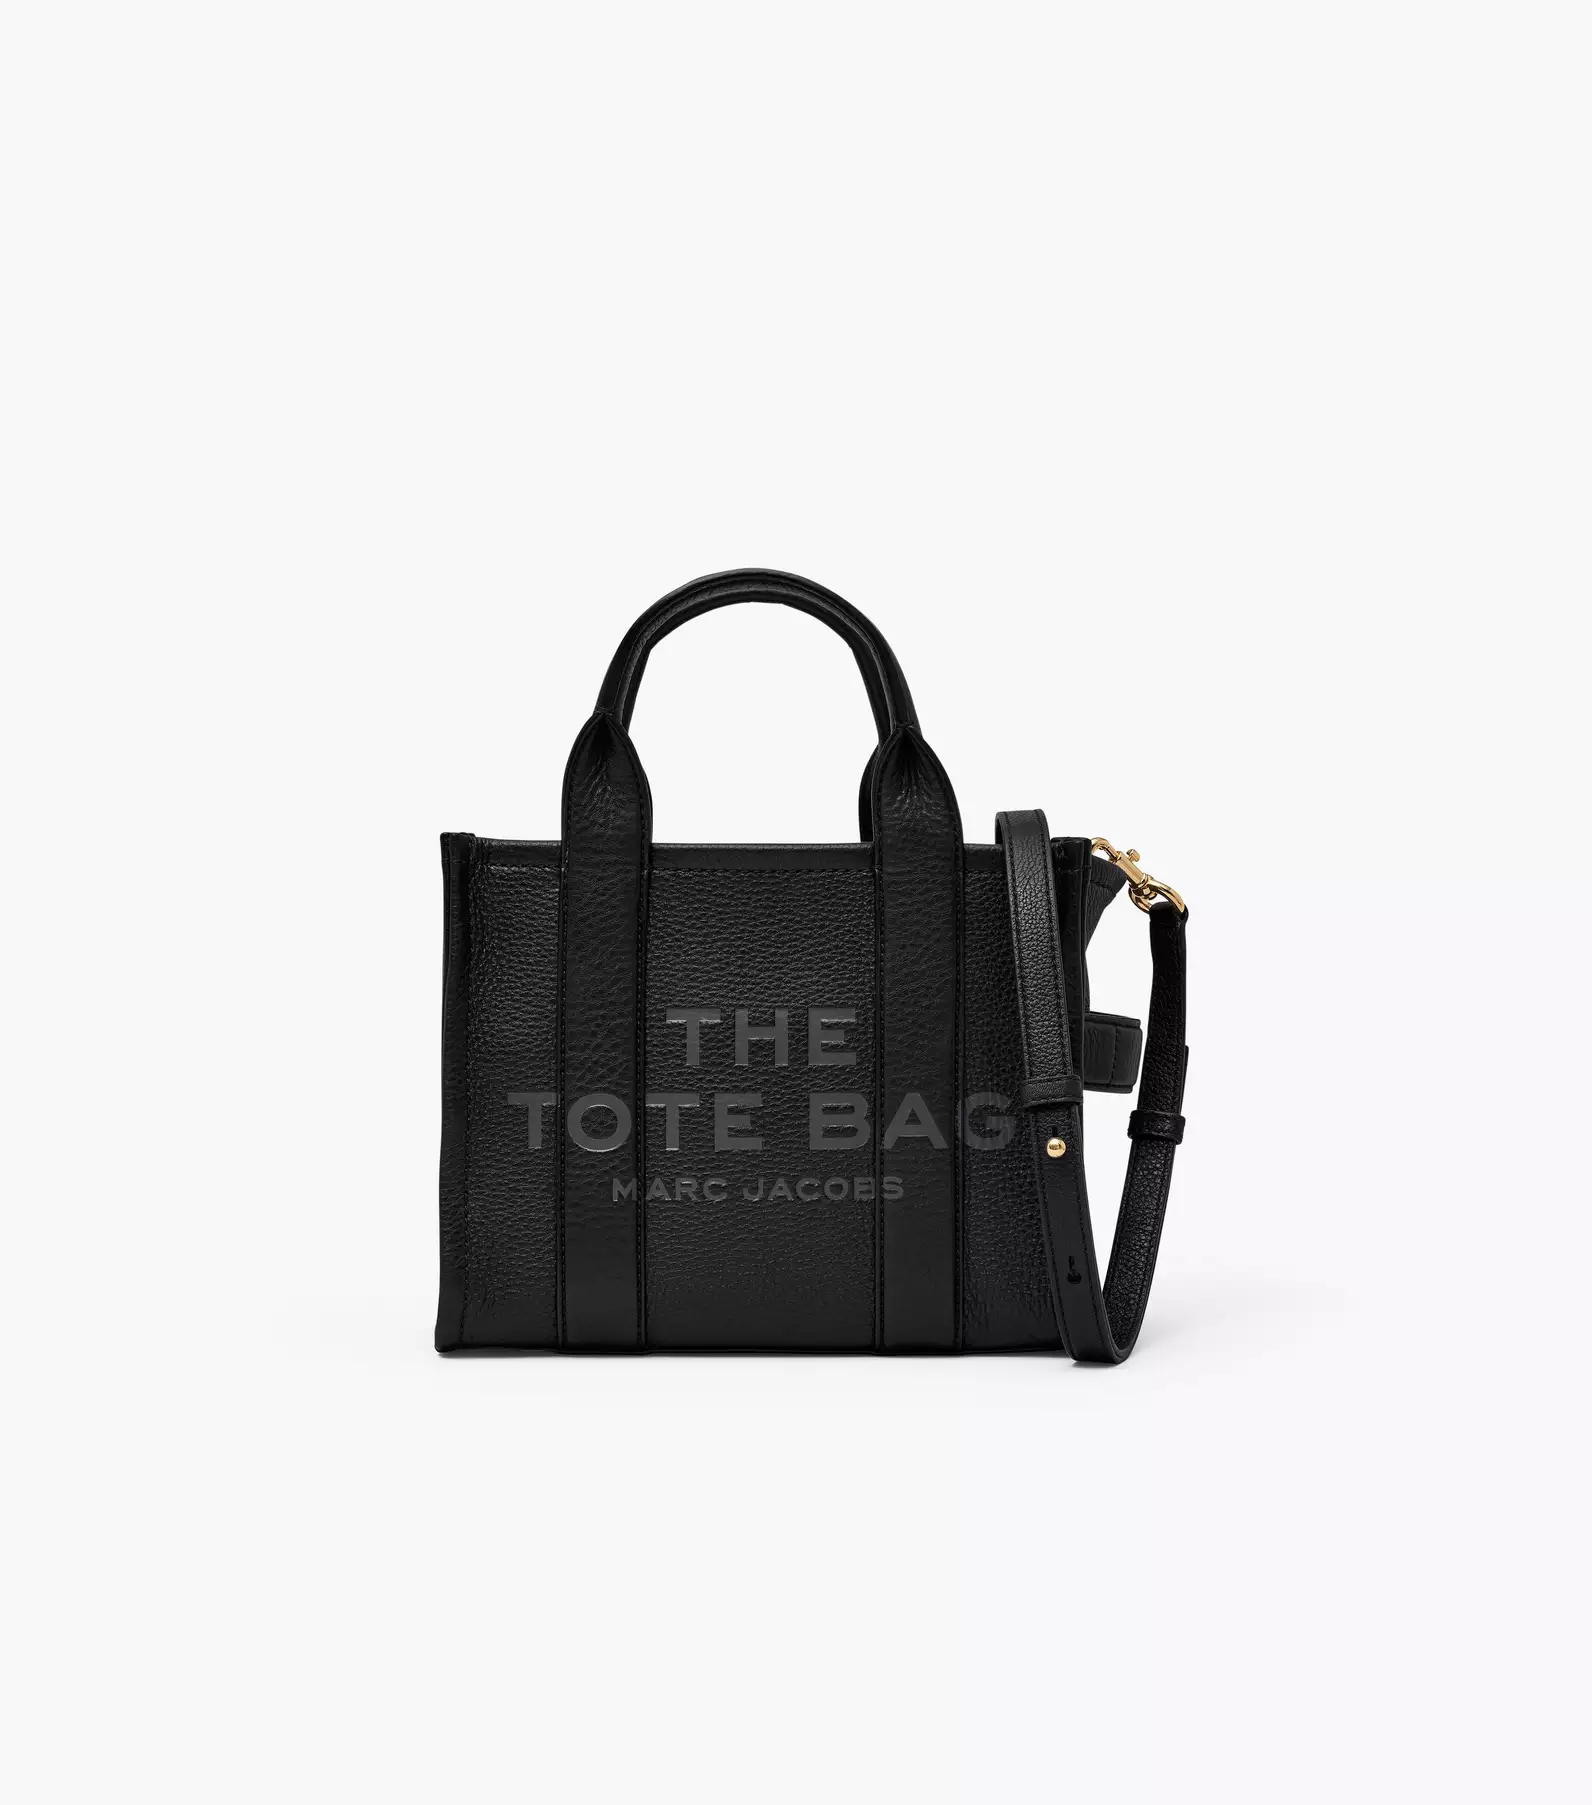 THE LEATHER SMALL TOTE BAG   マーク ジェイコブス   公式サイト